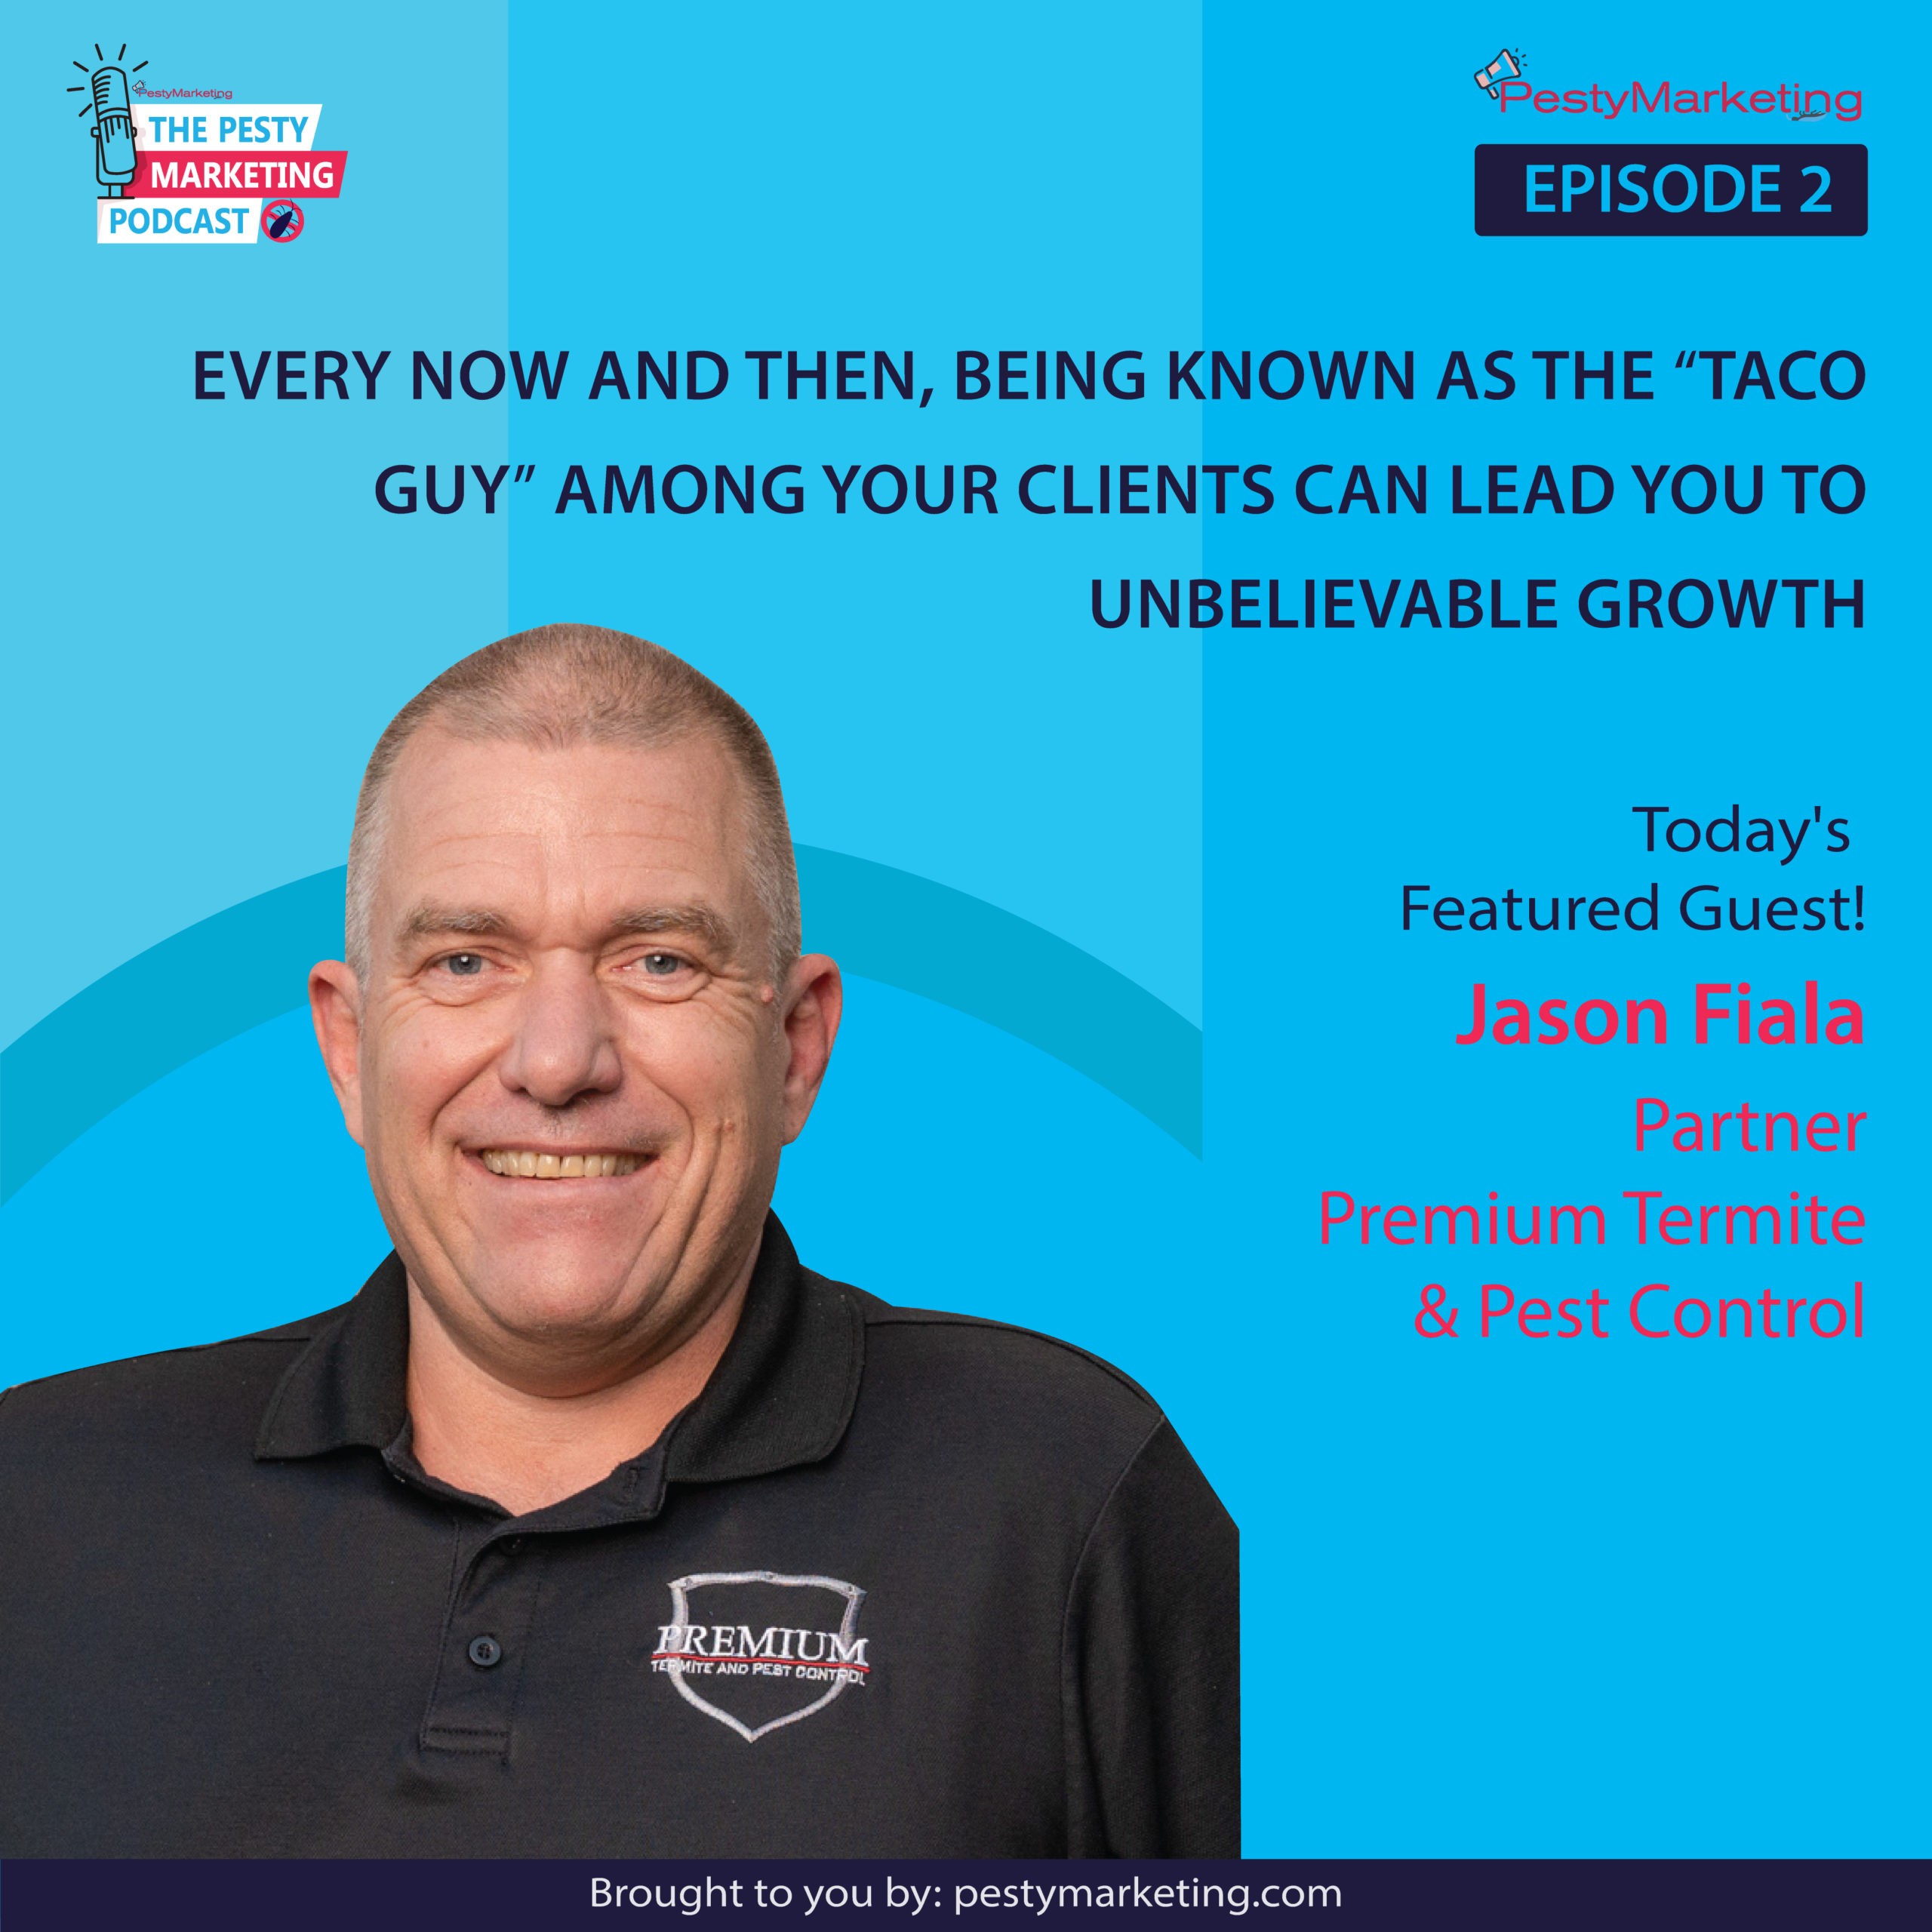 Every now and then, being known as the “taco guy” among your clients can lead you to unbelievable growth (with Jason Fiala)